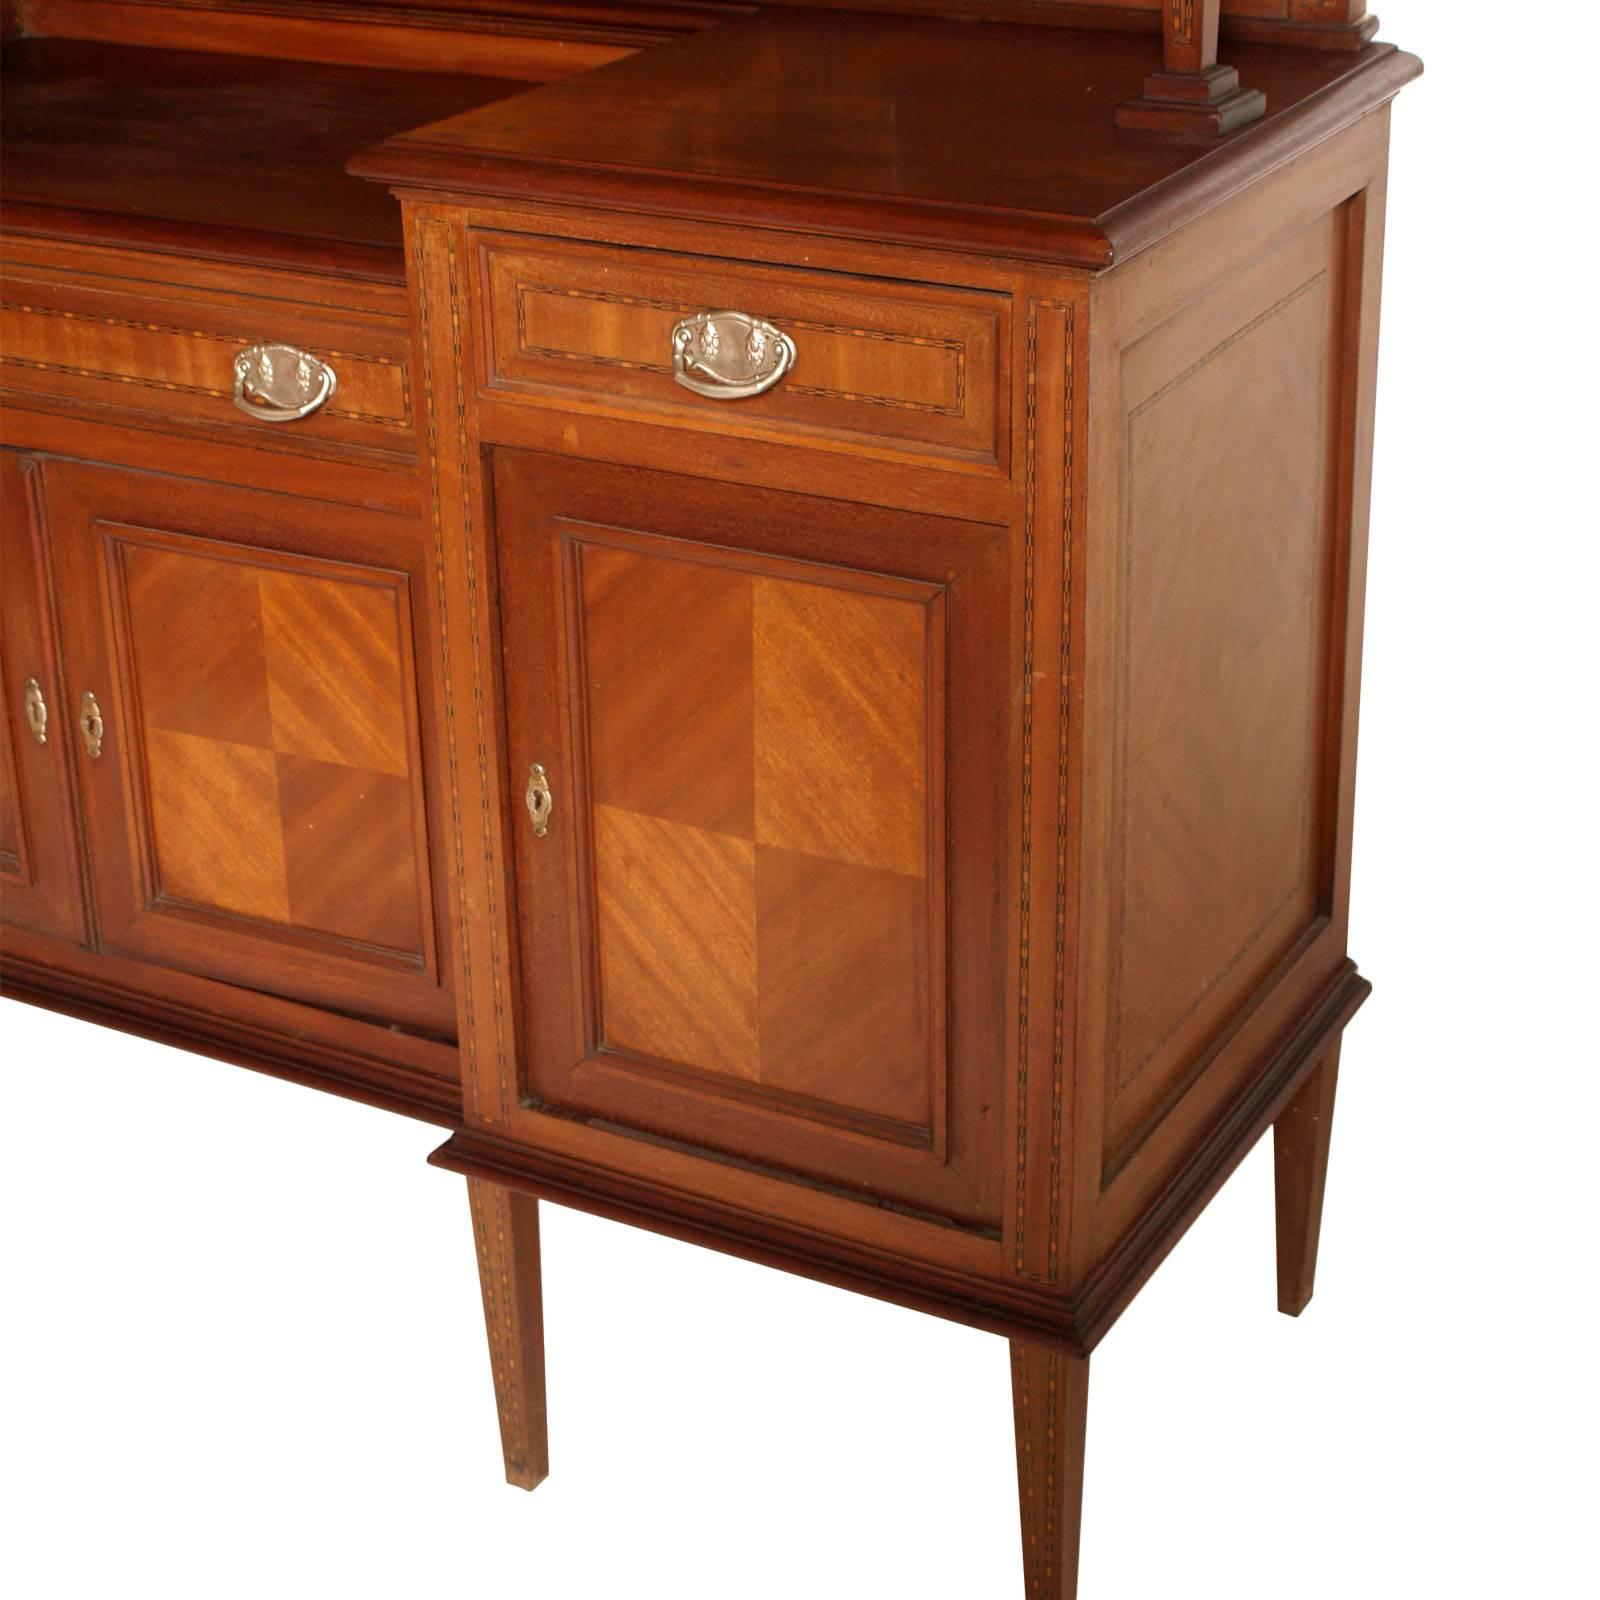 Beveled Early 20th Century Credenza Sideboard Belle Epoque, Walnut, Mahogany Maple Inlay For Sale